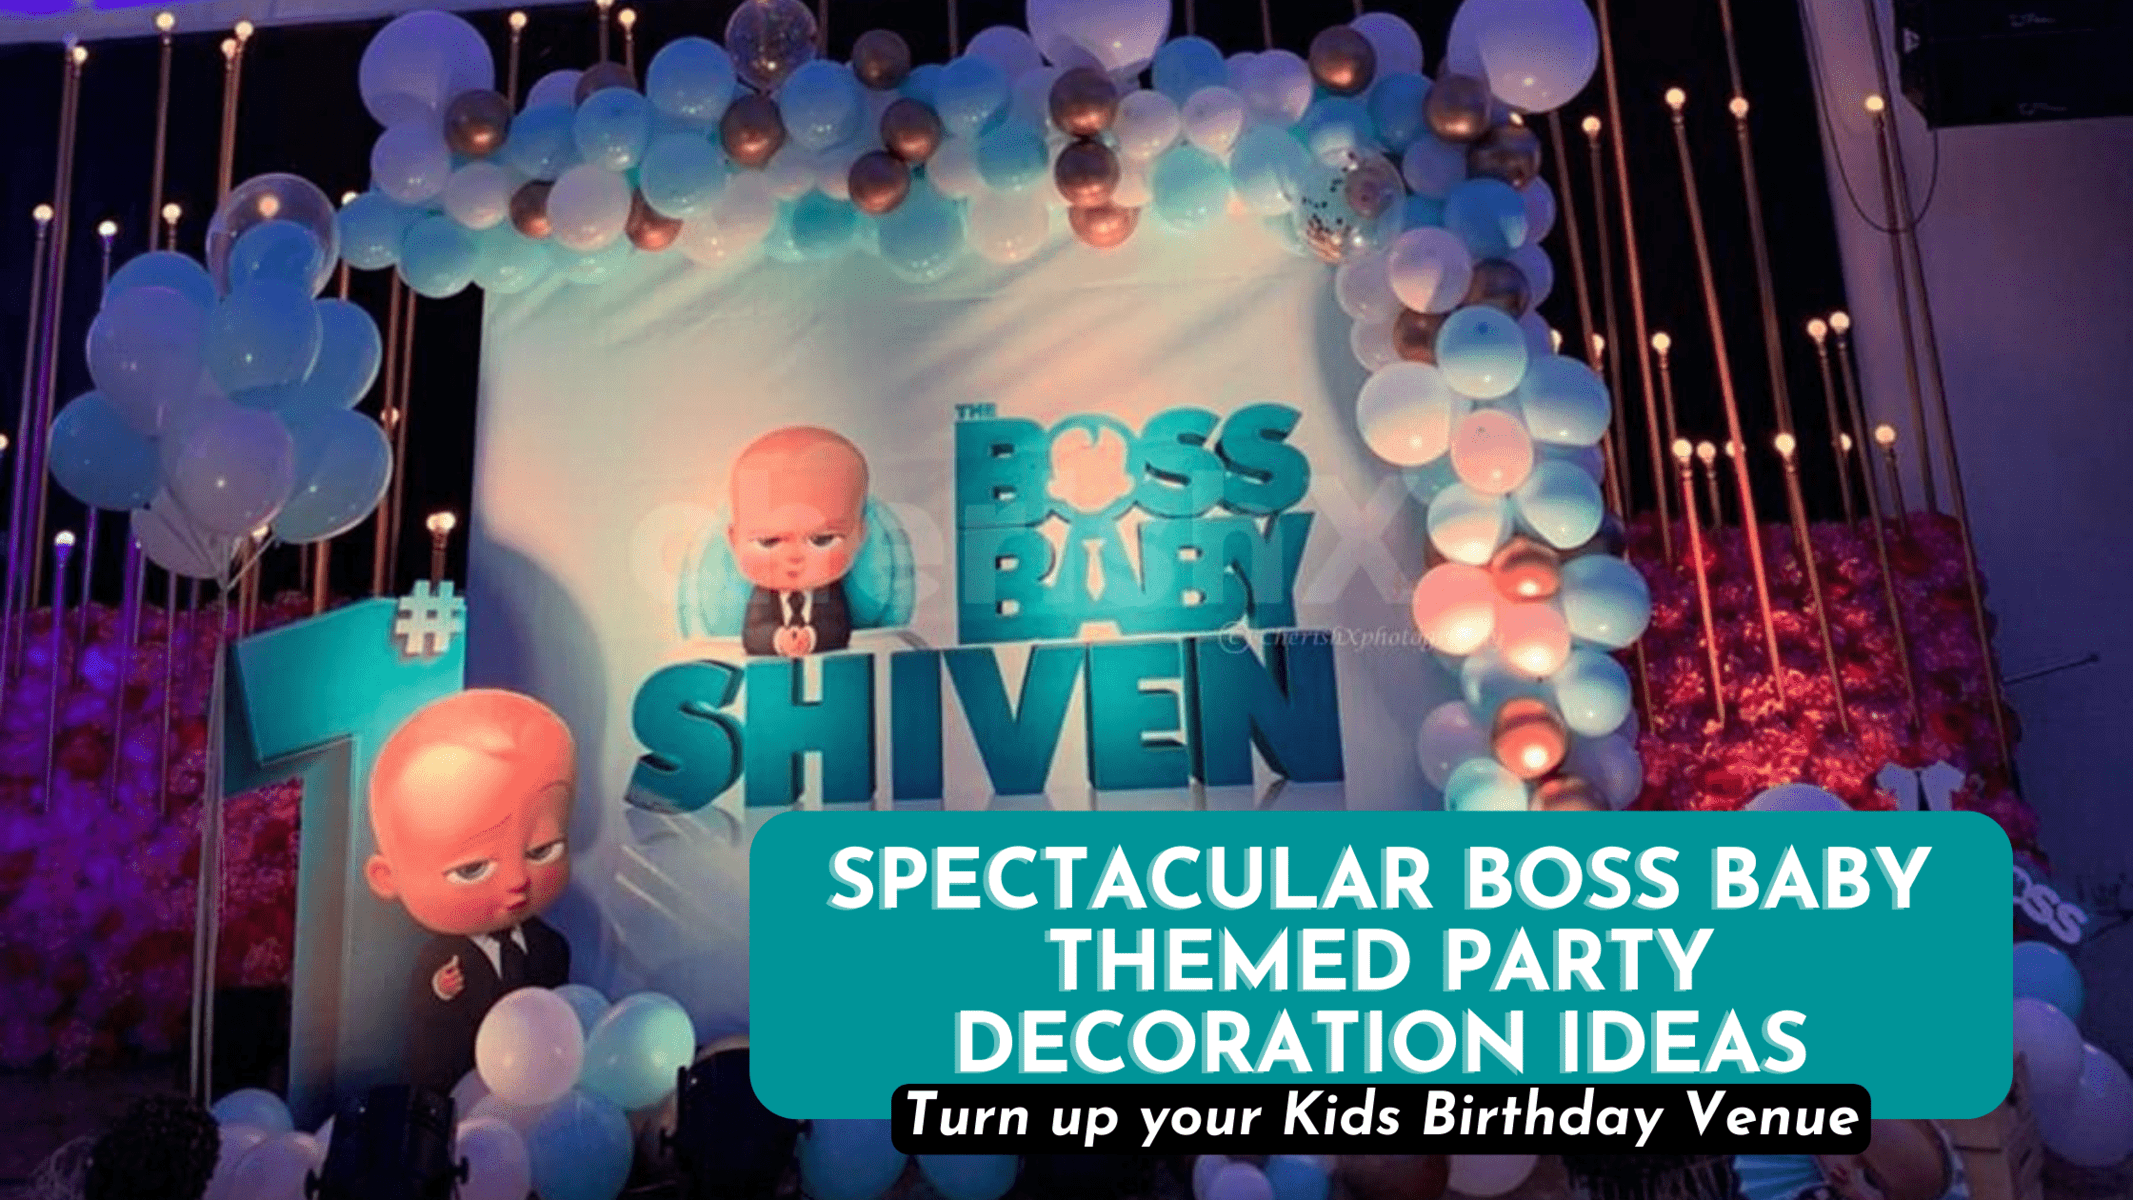 Spectacular Boss Baby Themed Party Decorations to turn up your Kids Birthday Venue